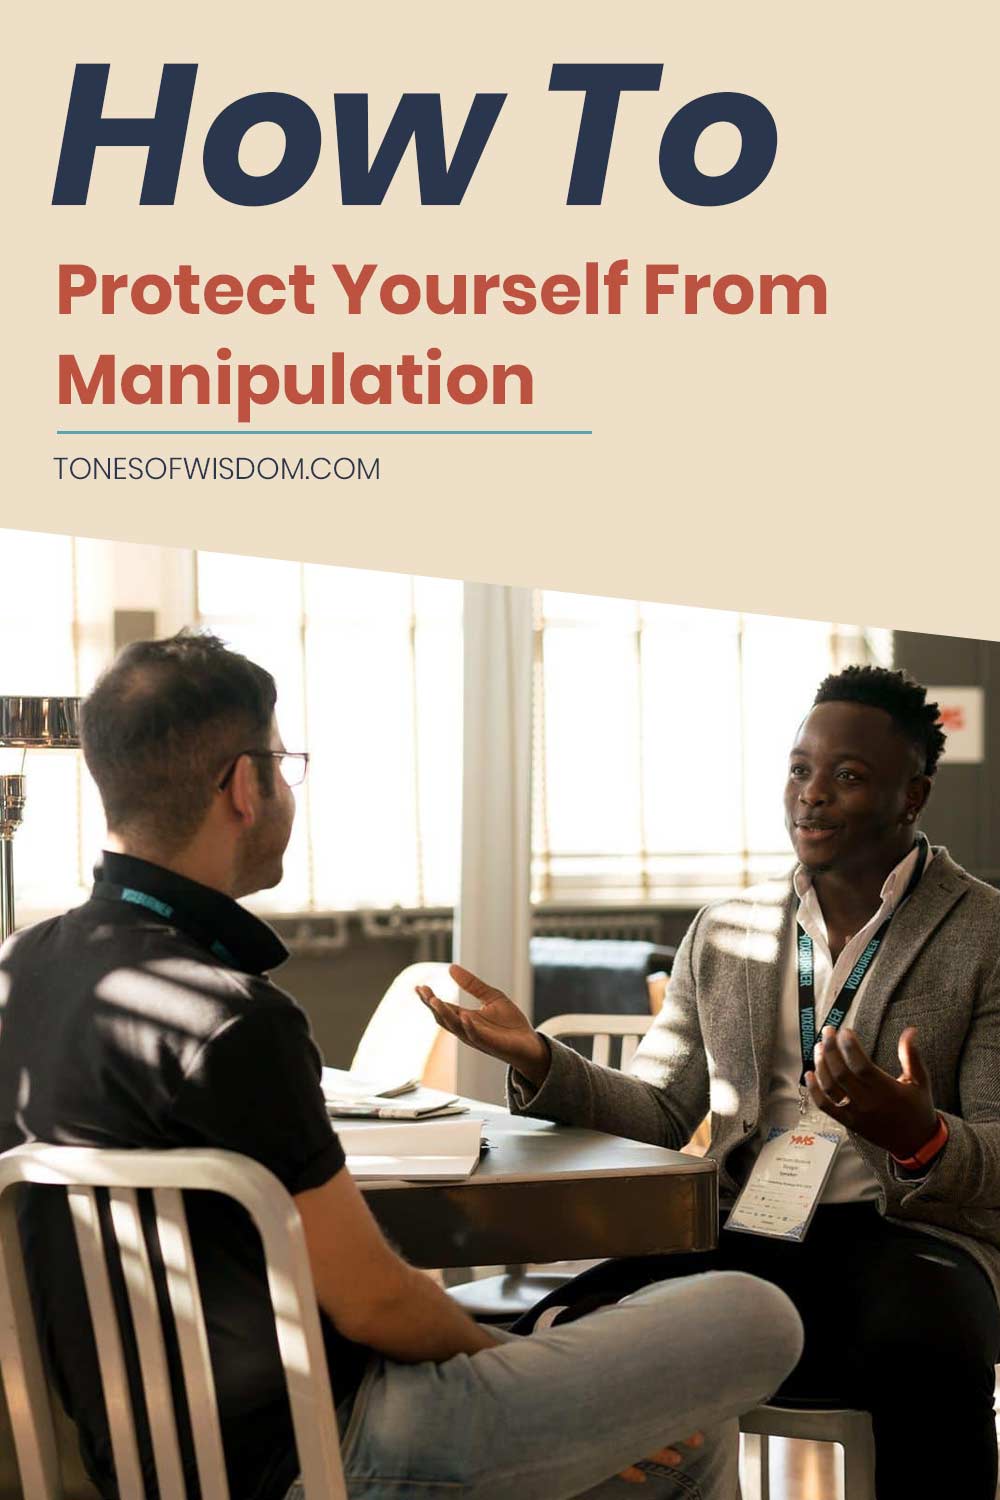 How To Protect Yourself From Manipulation